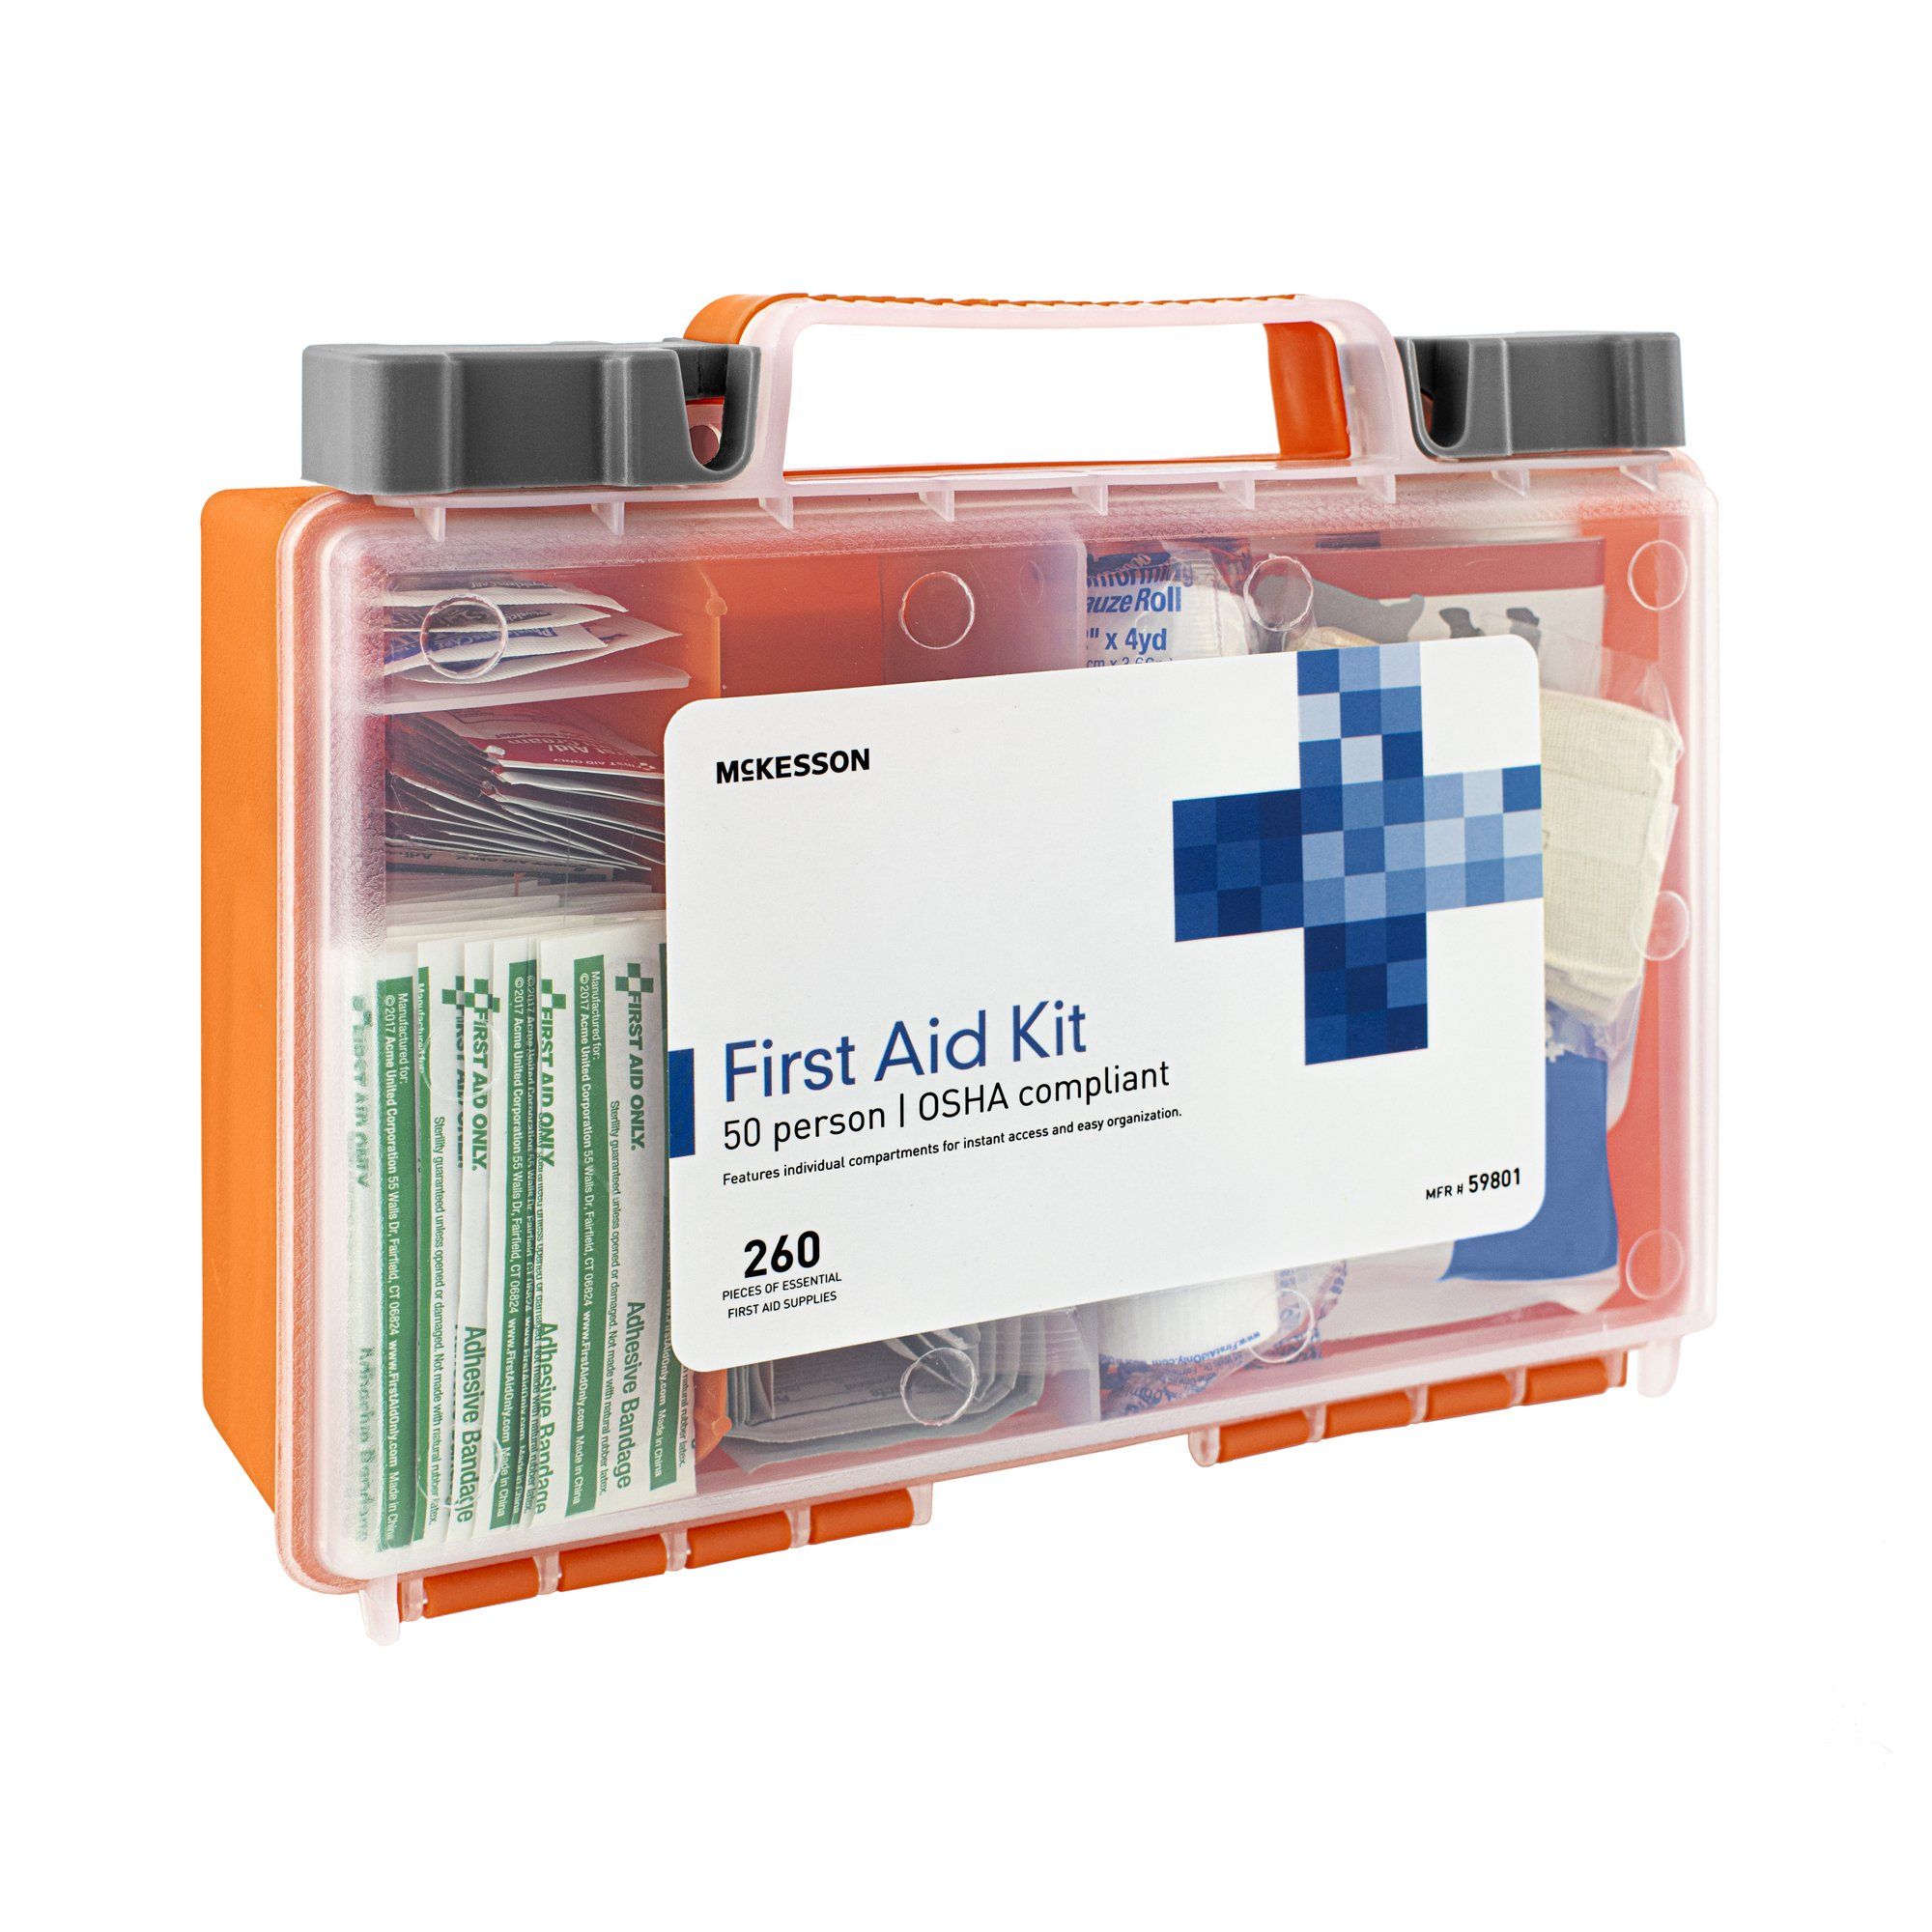 McKesson First Aid Kit 50 Person - 260 pieces